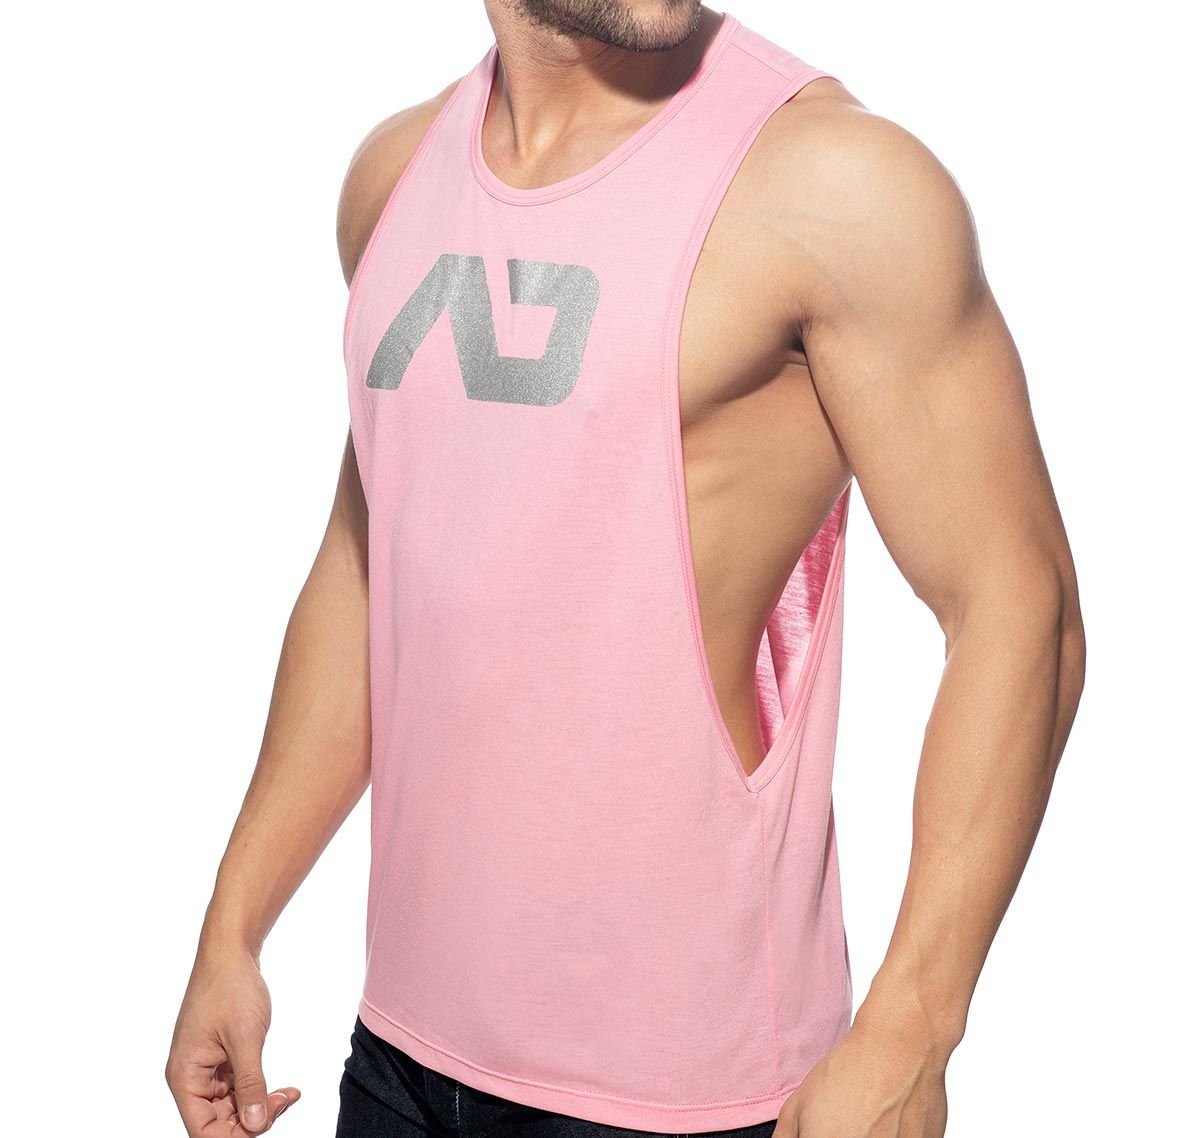 Addicted Tank Top AD LOW RIDER AD043, pink